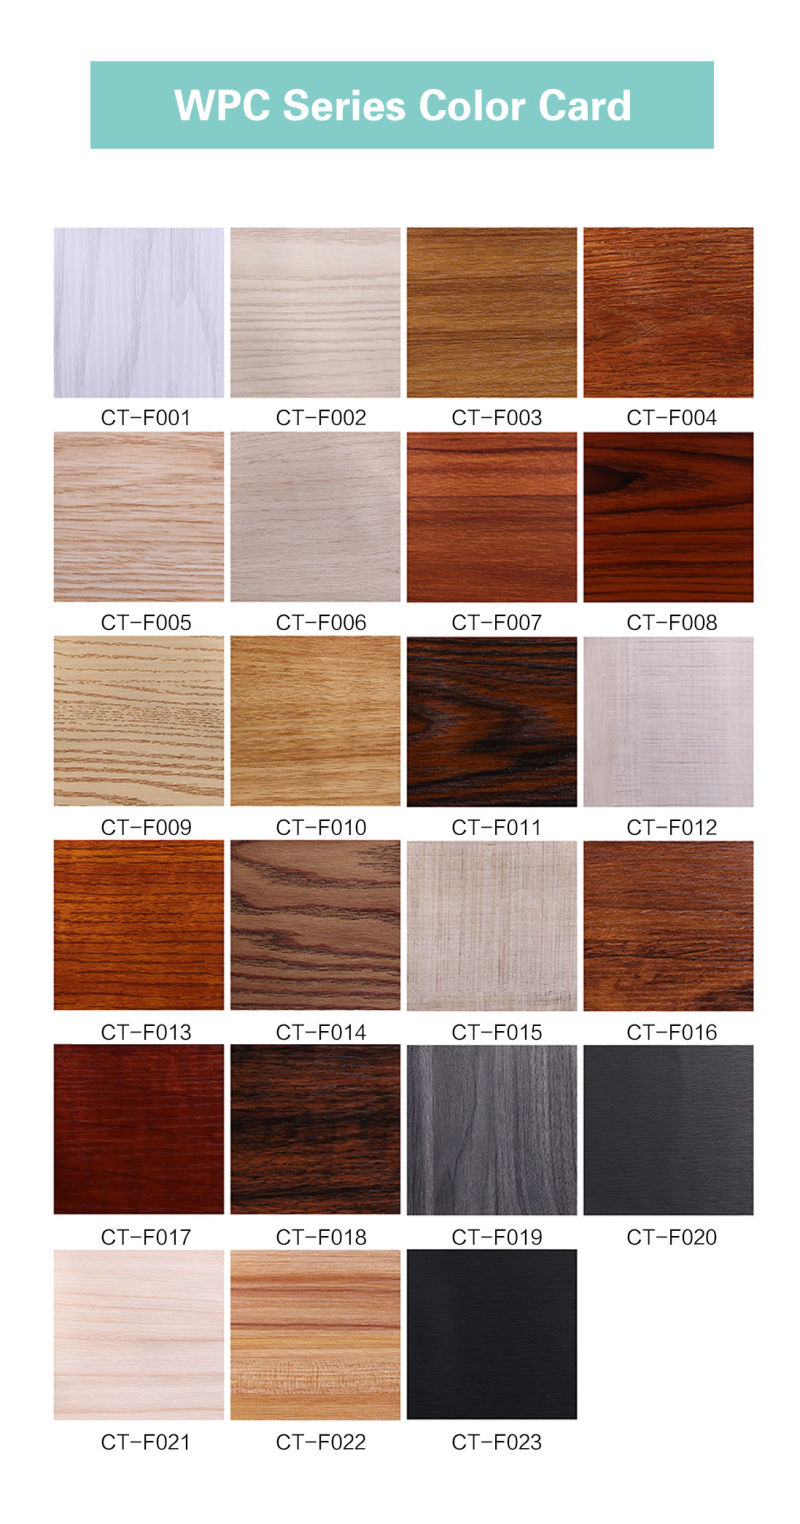 China 2021 Red Film WPC Composite Wall Panel Boards